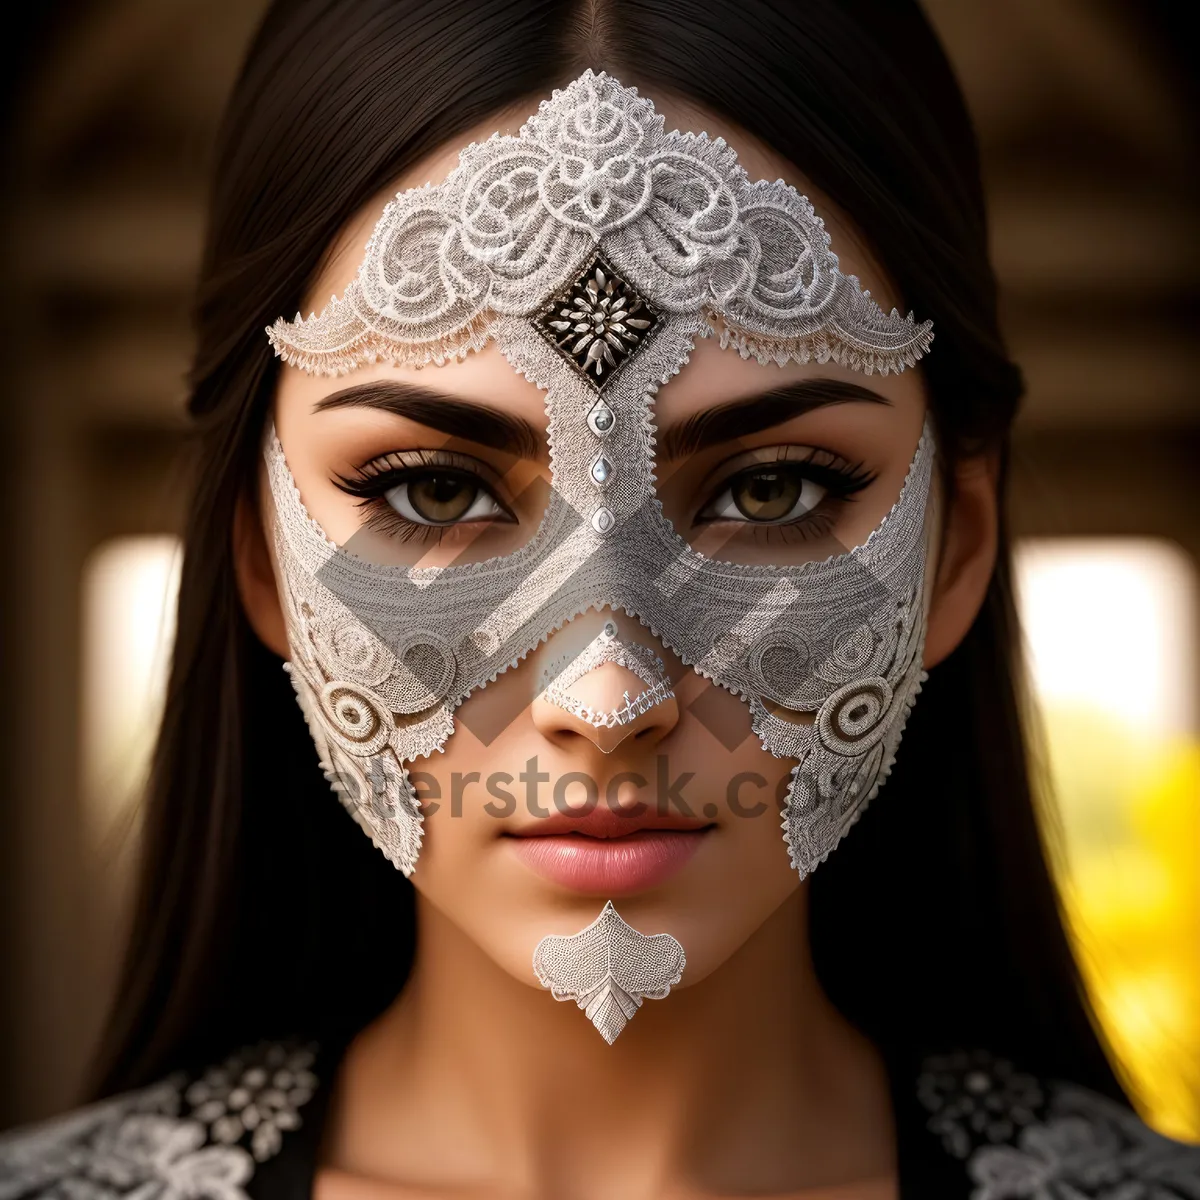 Picture of Mysterious Venetian Masquerade Mask with Stylish Makeup